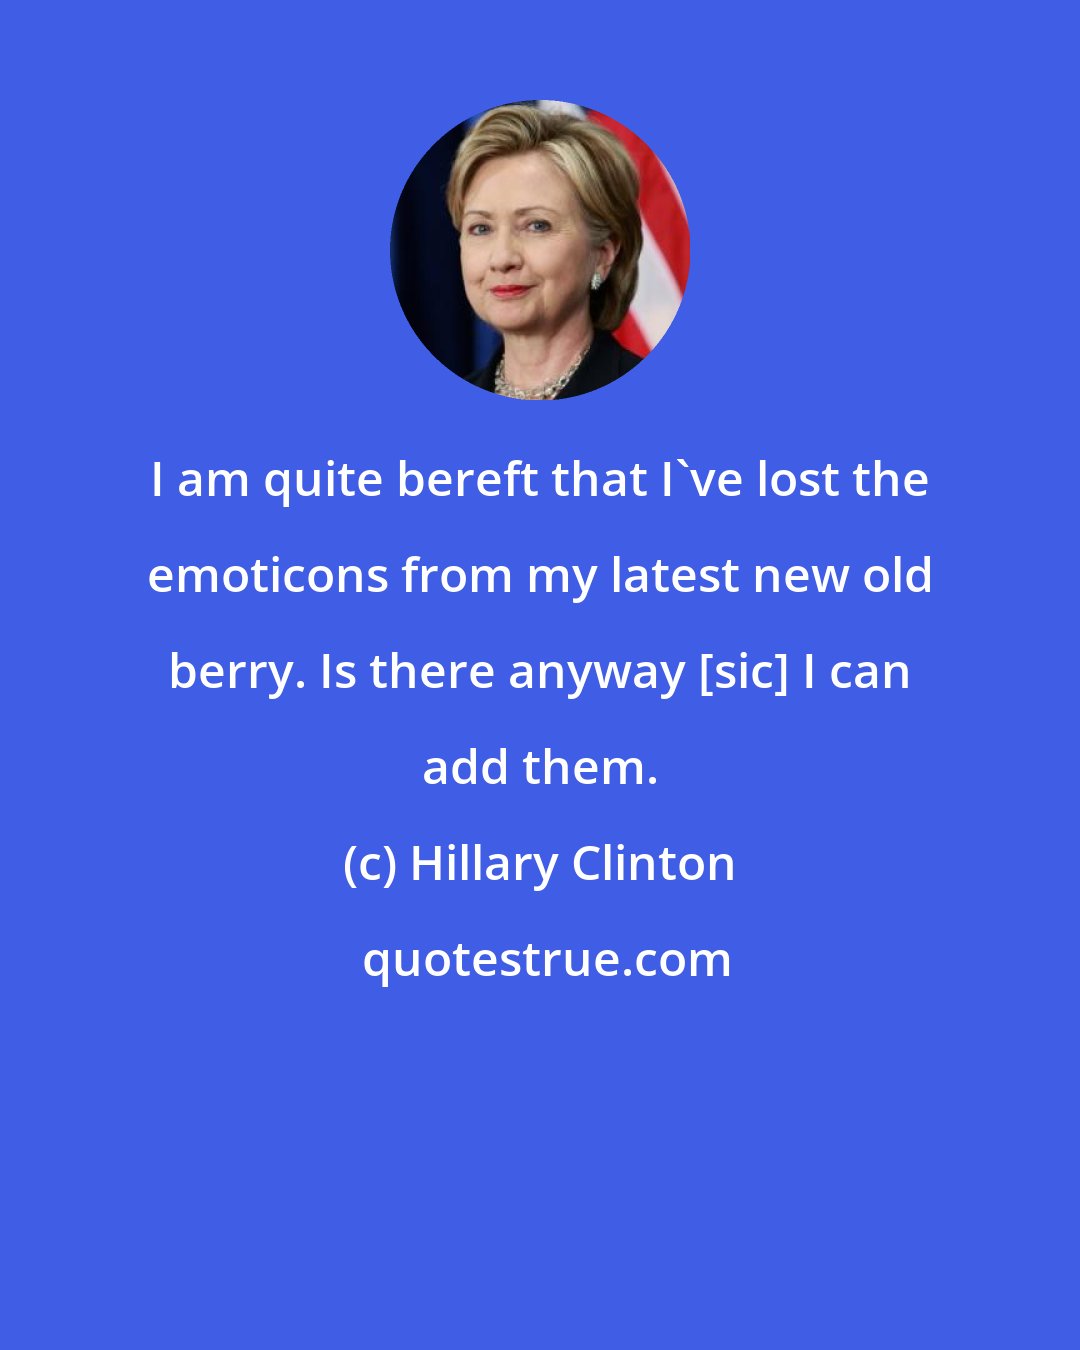 Hillary Clinton: I am quite bereft that I've lost the emoticons from my latest new old berry. Is there anyway [sic] I can add them.